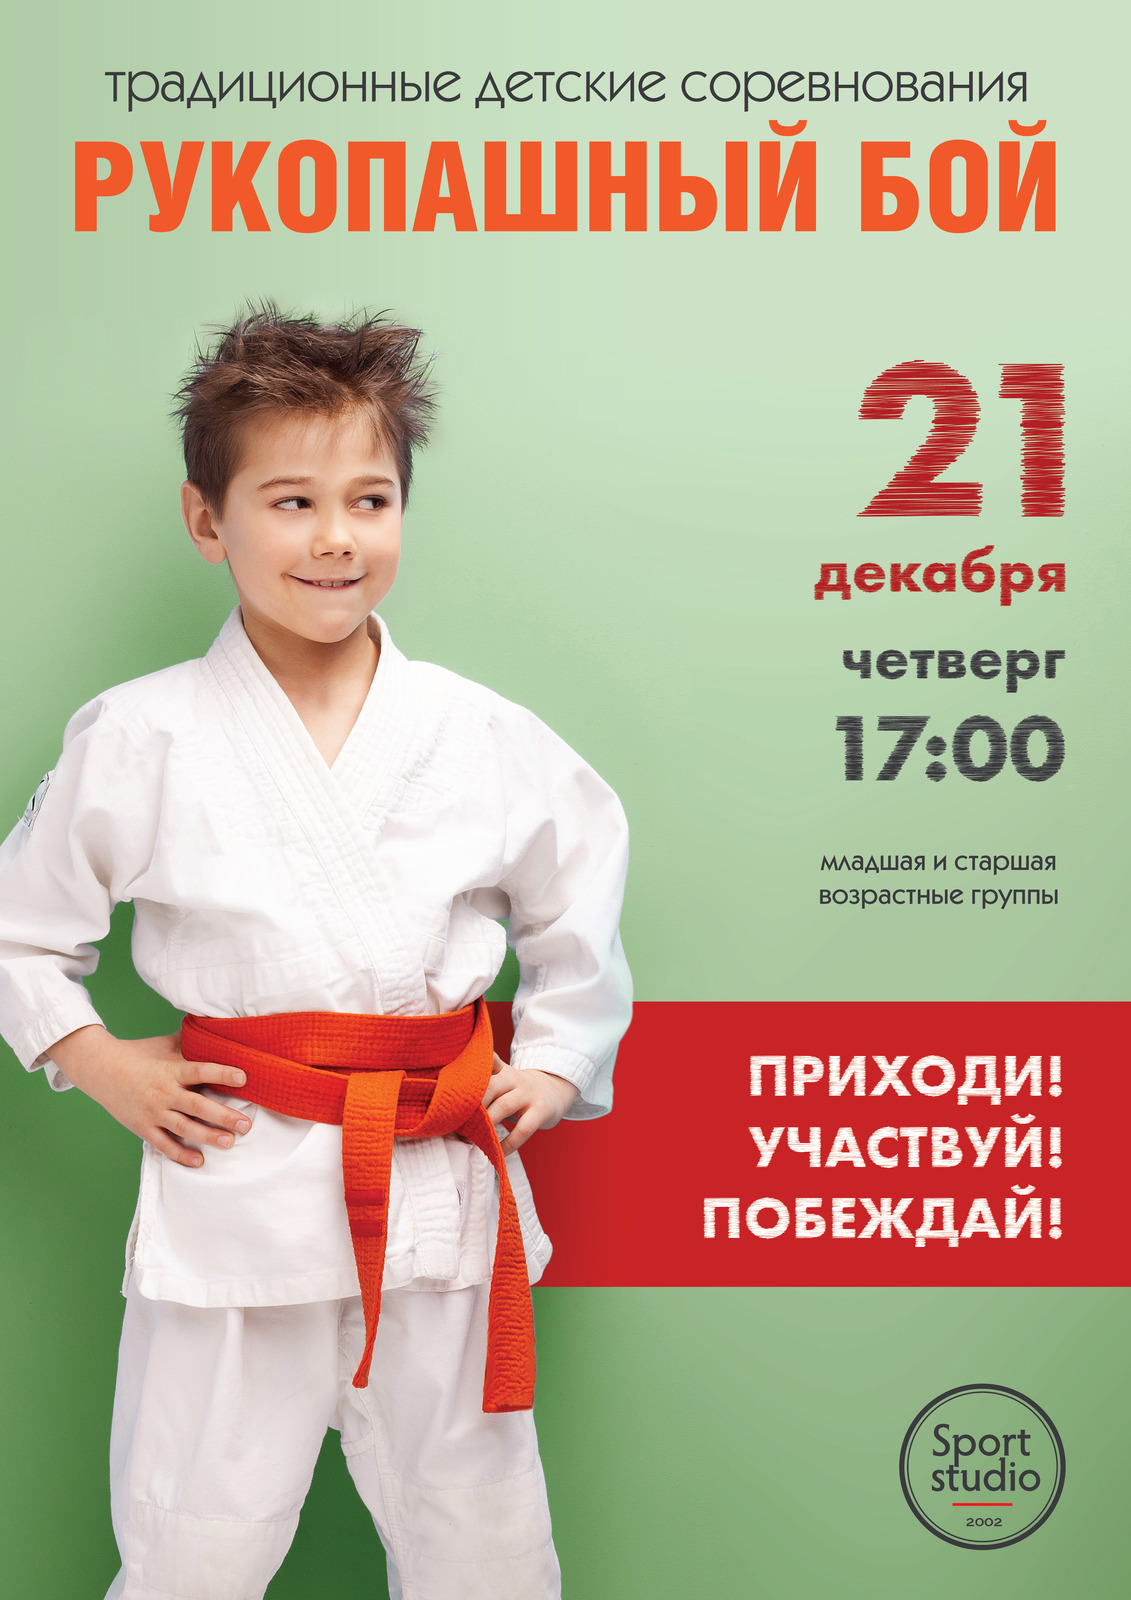 Hand-to-hand fighting tournament for the youngest sportsmen